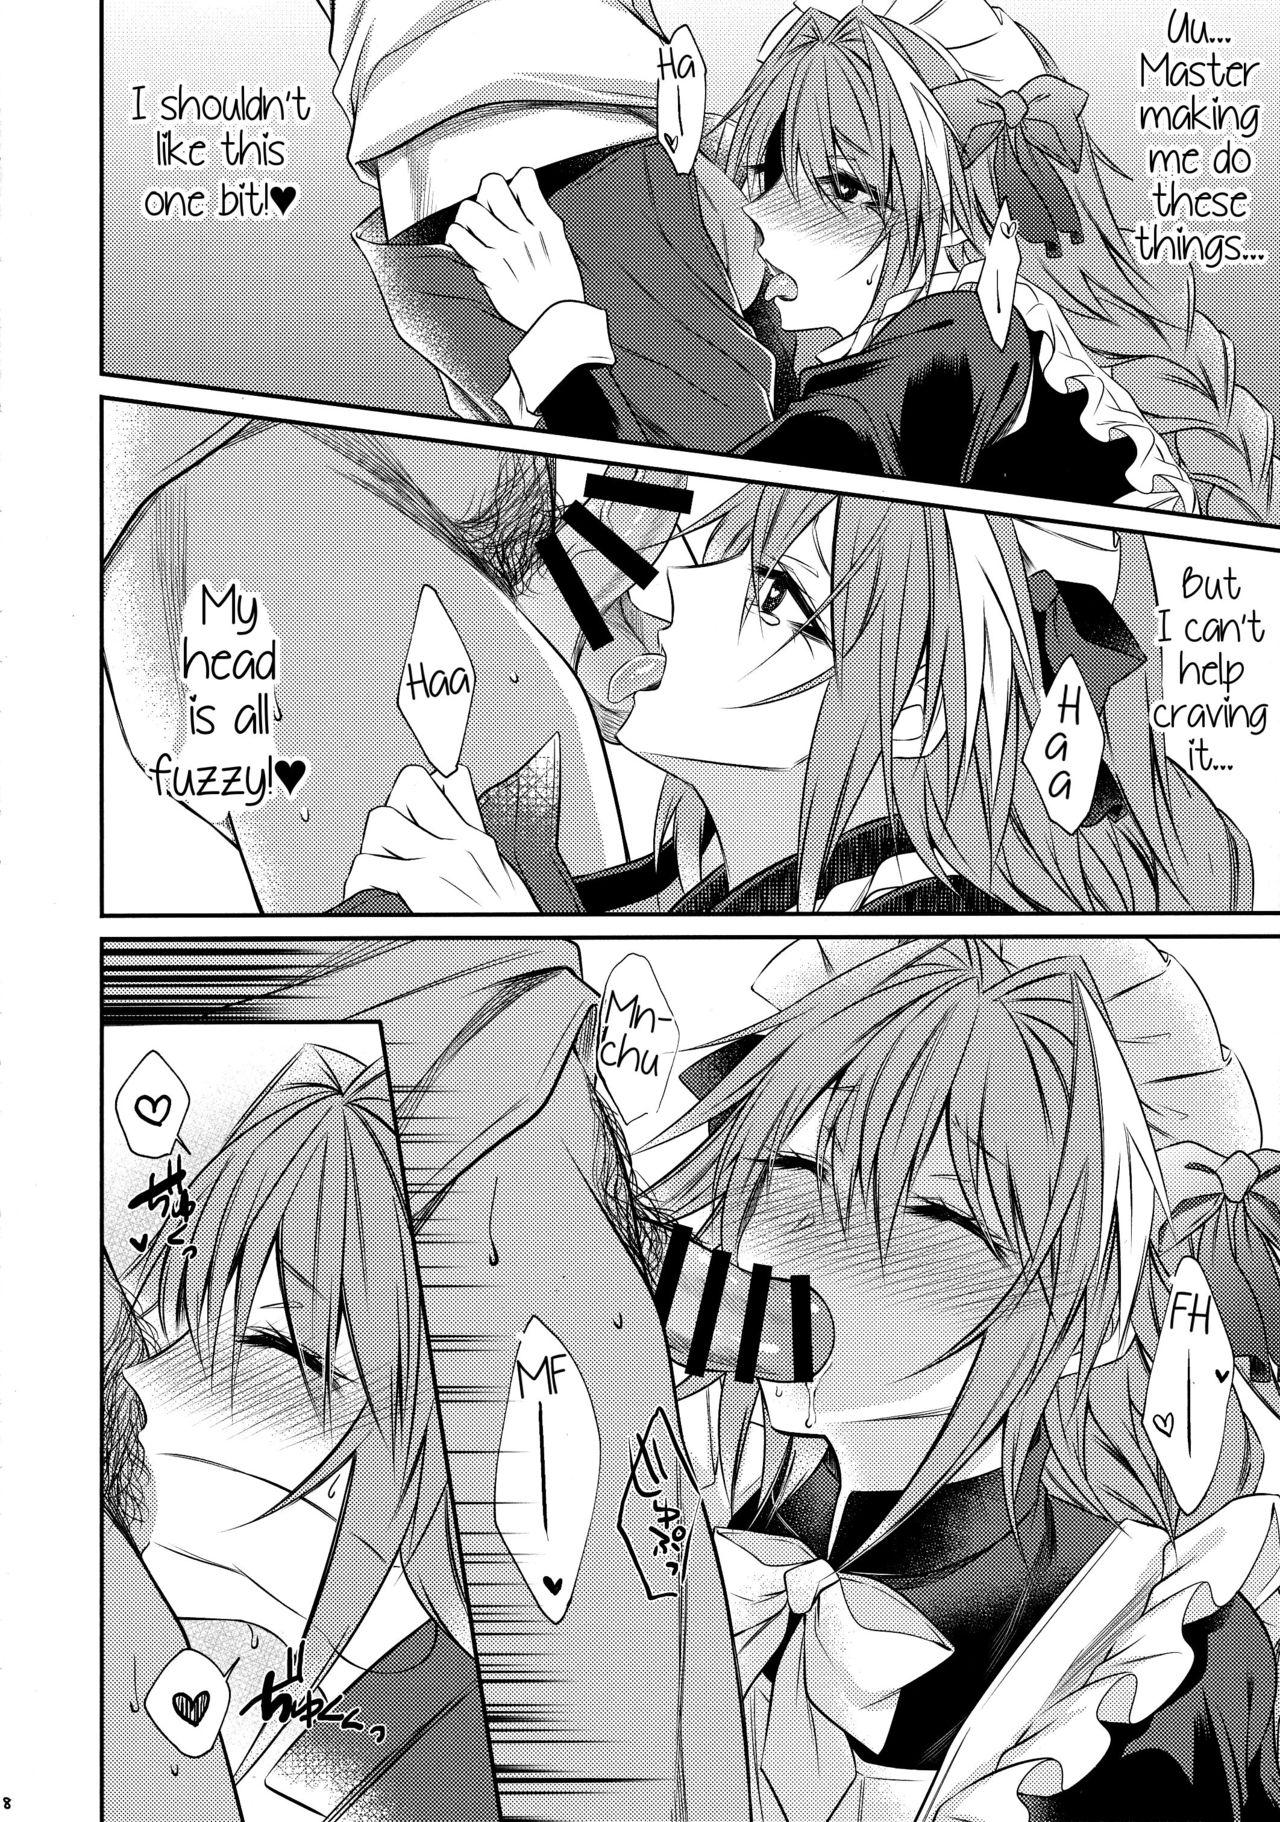 Dicks Meido in Astolfo - Fate grand order Sex Pussy - Page 8